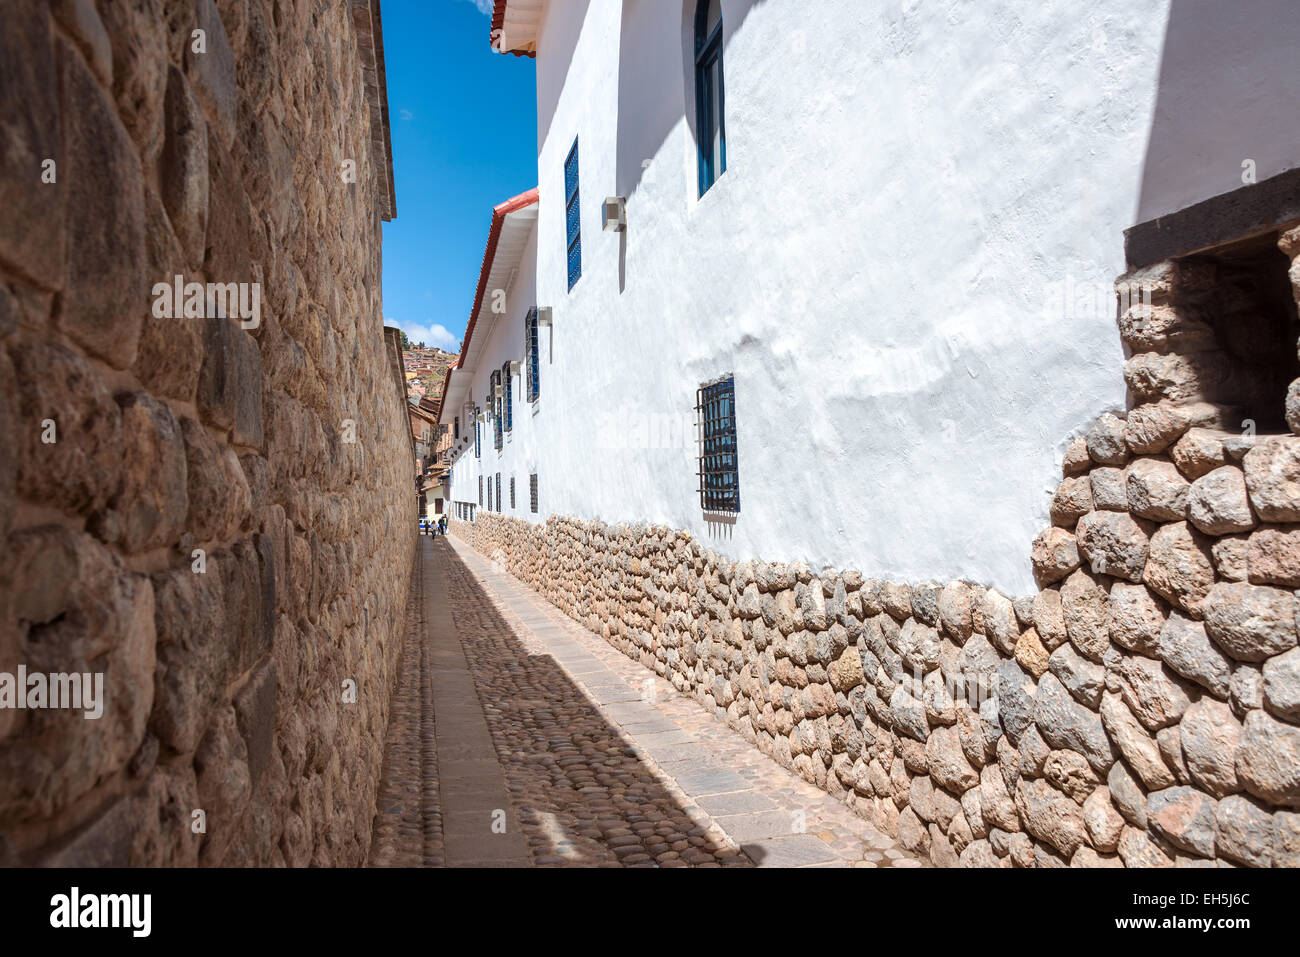 Narrow street alley in Cuzco, Peru with Incan stonework and colonial architecture visible Stock Photo